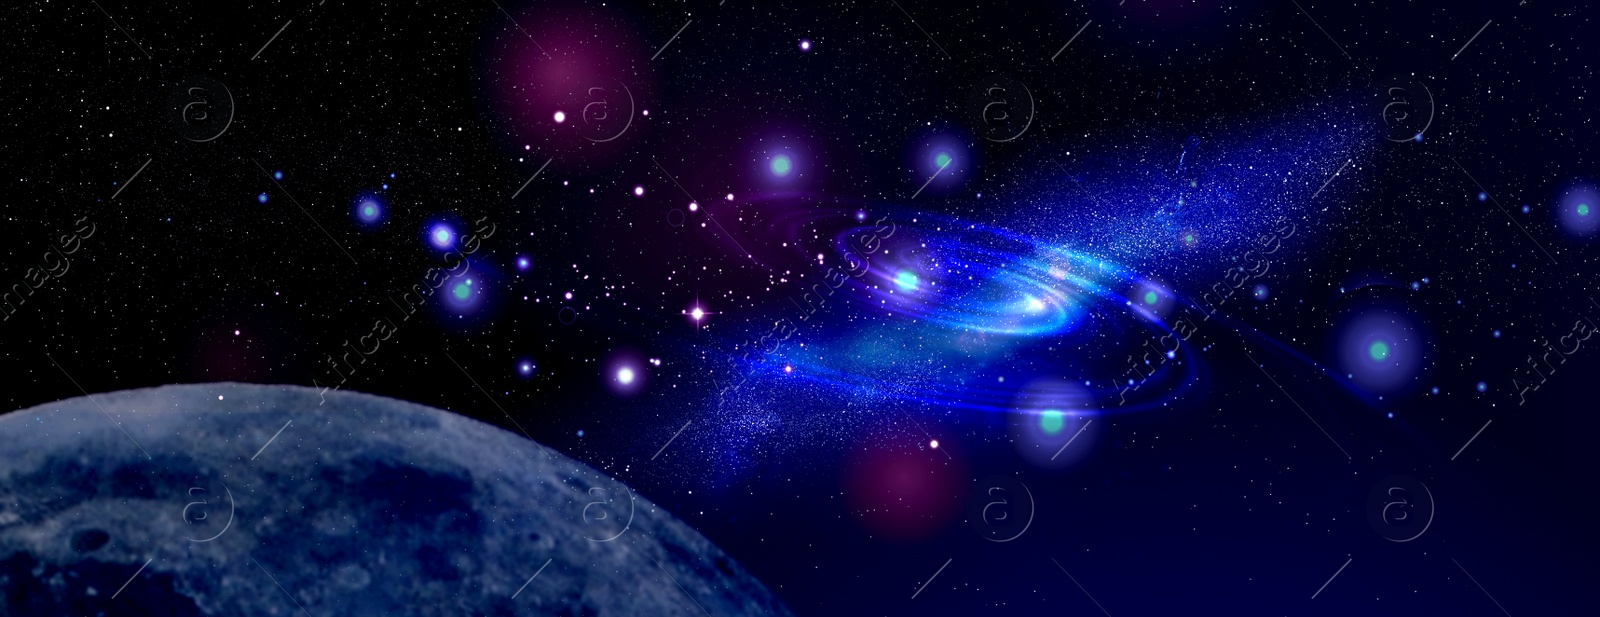 Illustration of Amazing illustration of galaxy with stars and planets, banner design. Fantasy world